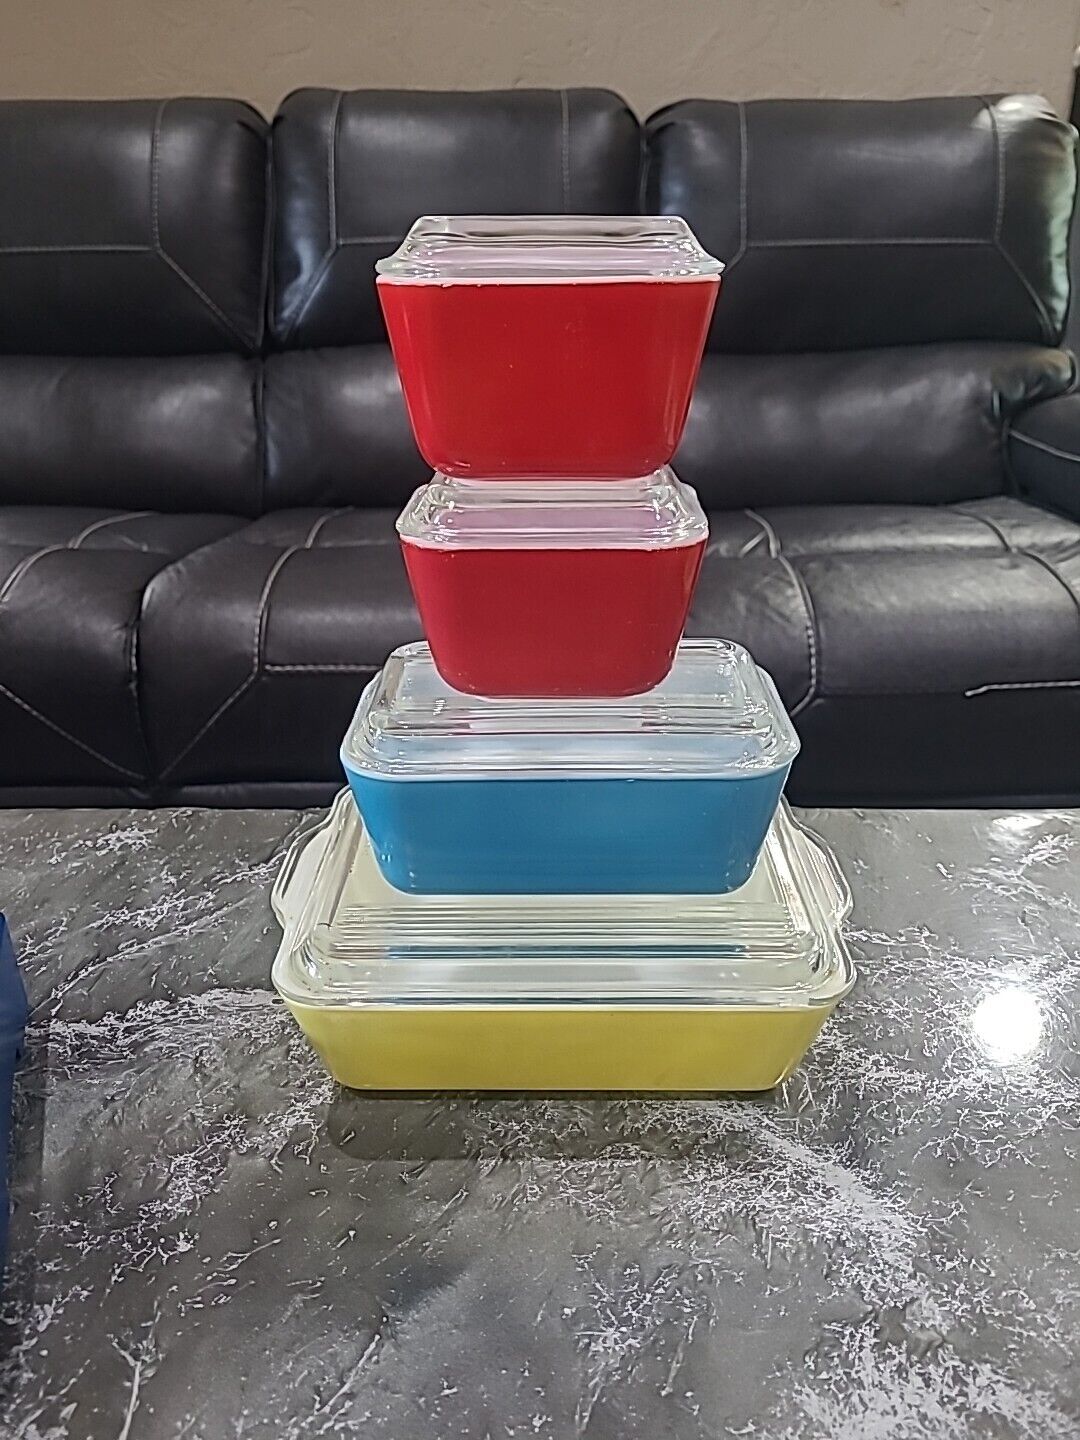 VINTAGE SET OF 4 PYREX REFRIGERATOR DISHES WITH LIDS PRIMARY COLORS